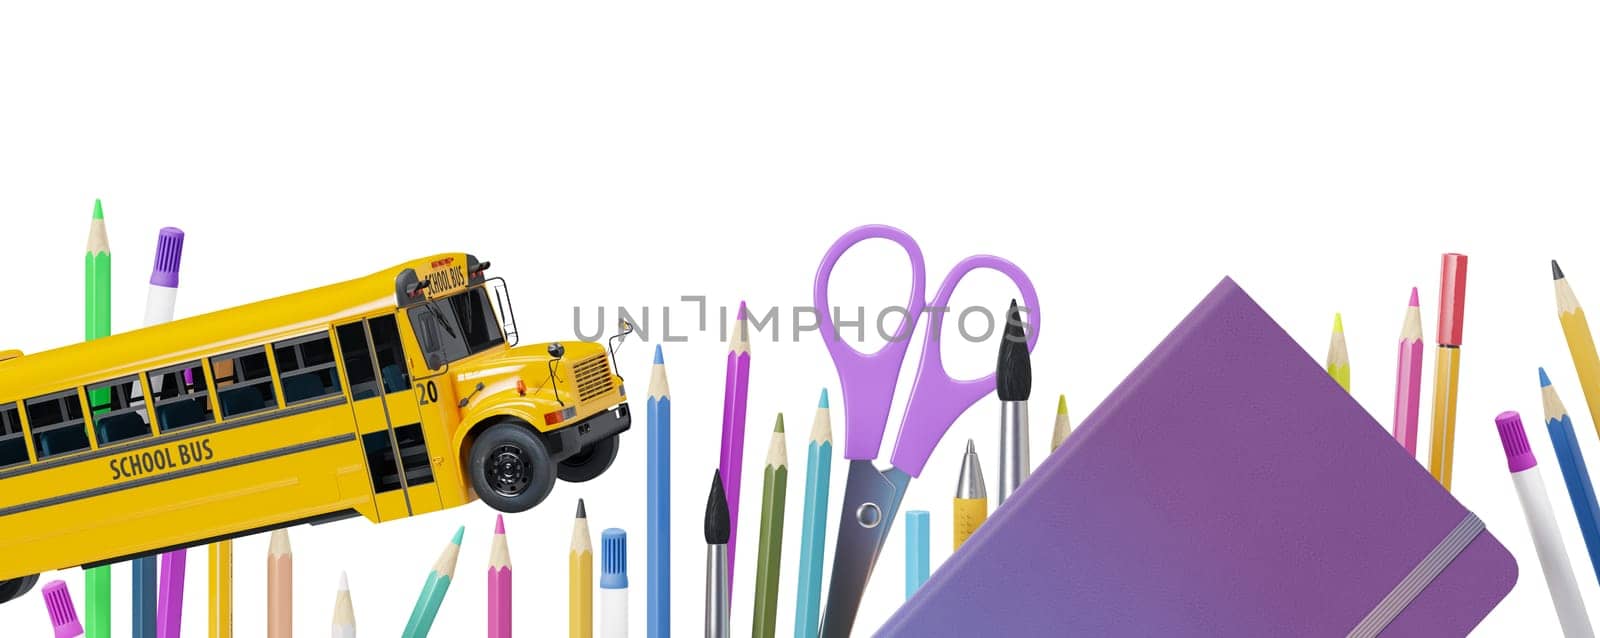 Colorful school stationery, supplies isolated on white background. Bottom border. Applicable for posters, announcements advertising. Education, daycare, preschool. Back to school shopping, sale. 3D